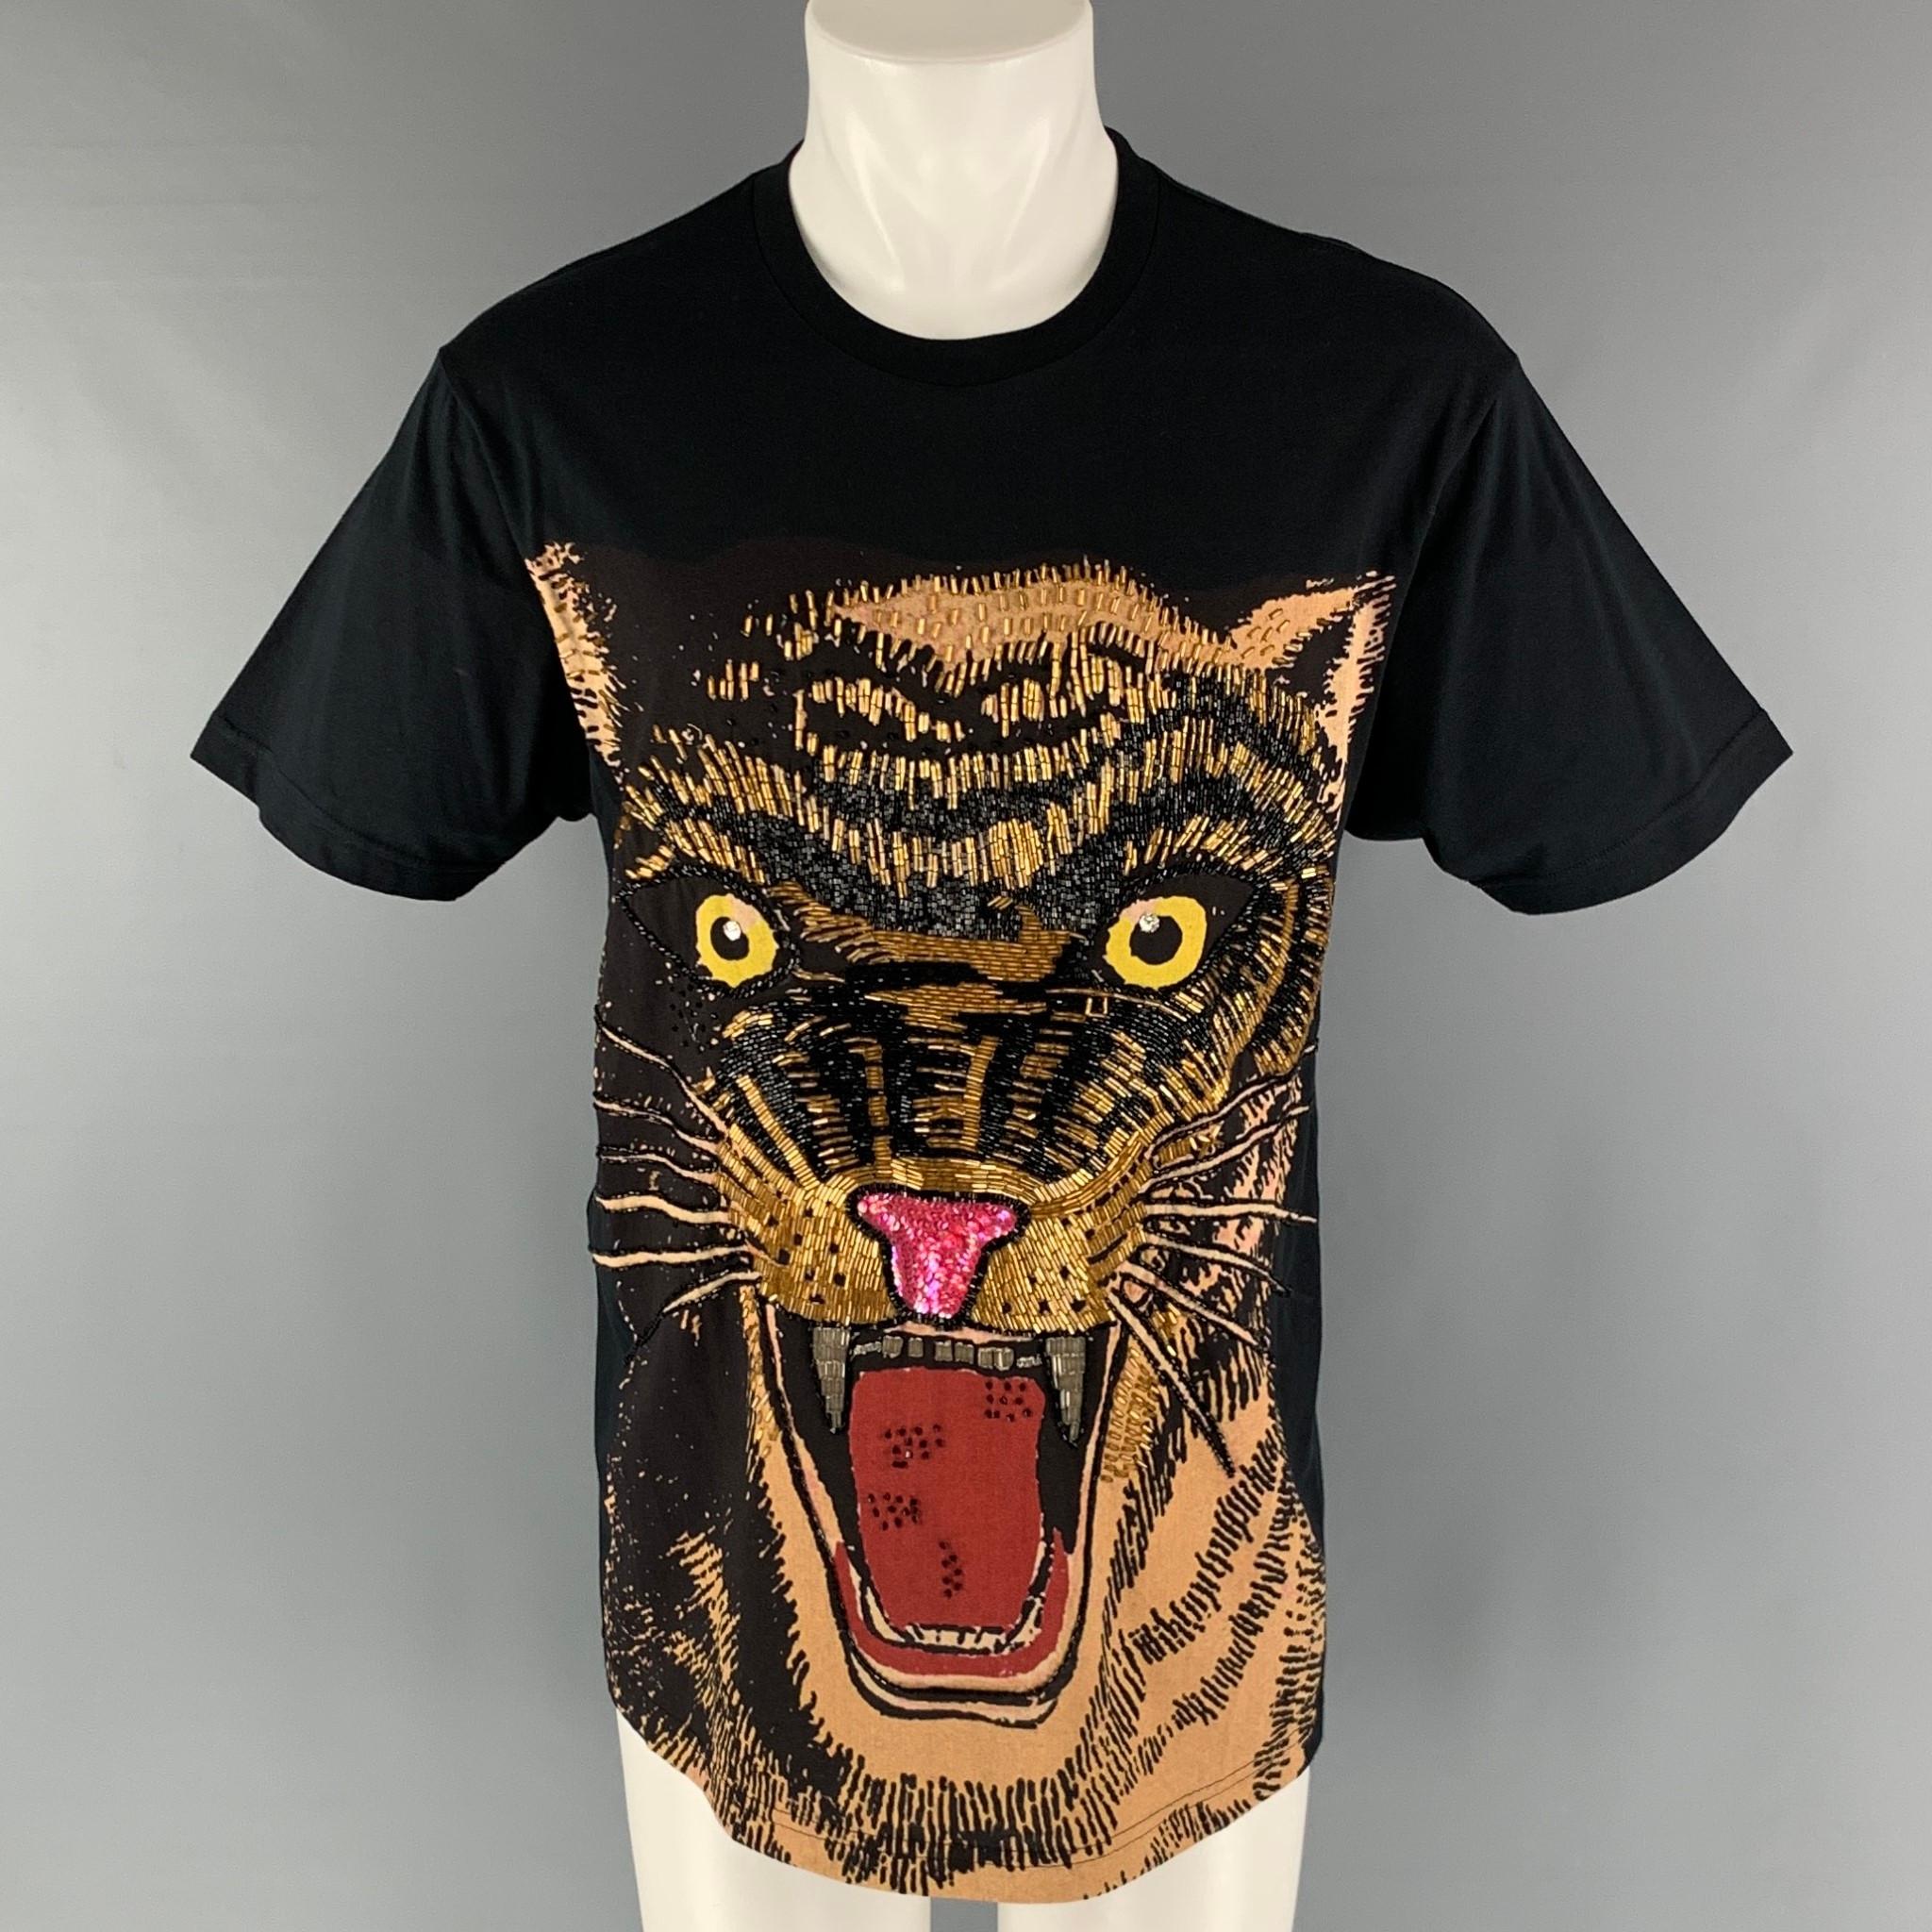 GUCCI F/W 2019 oversized t-shirt comes in a black jersey cotton knit material featuring a feline print with bead and sequin embroidery design at front and a crew-neck. Made in Italy.

New with Tags.
Marked: XXS

Measurements:

Shoulder: 21.5